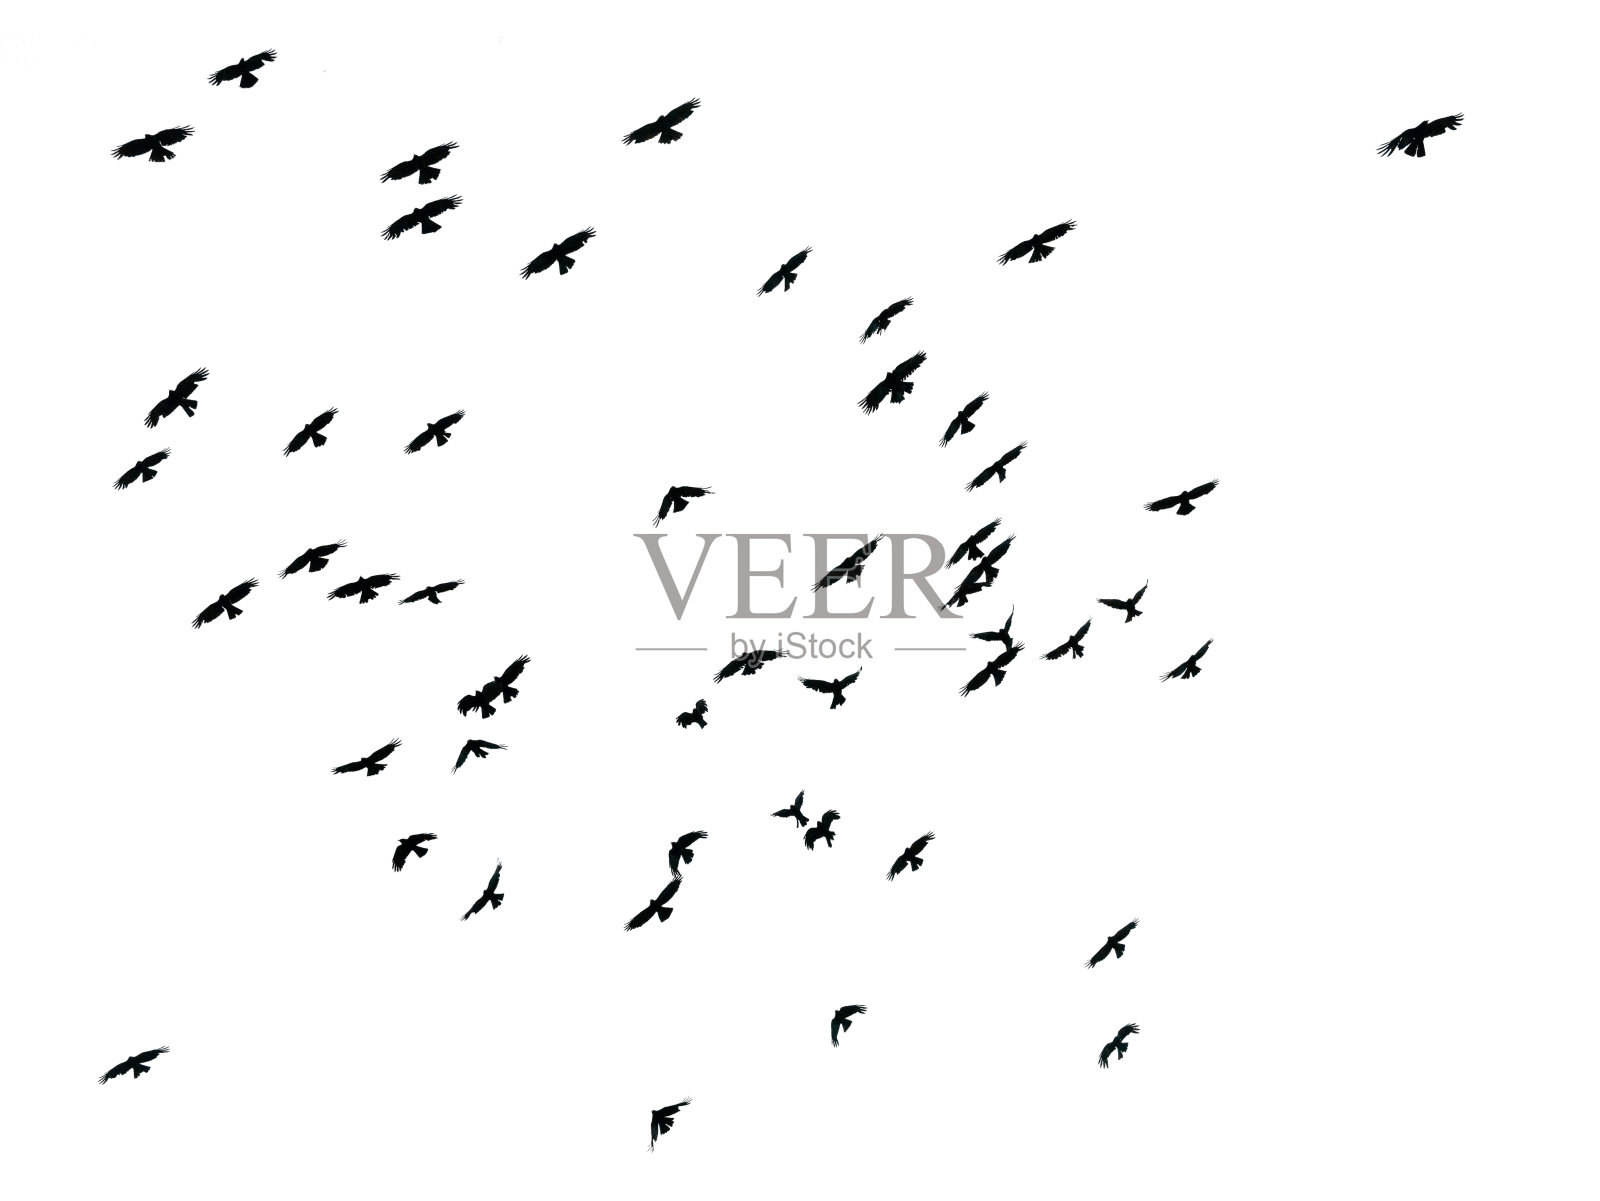 Flock of birds on white background, isolated照片摄影图片